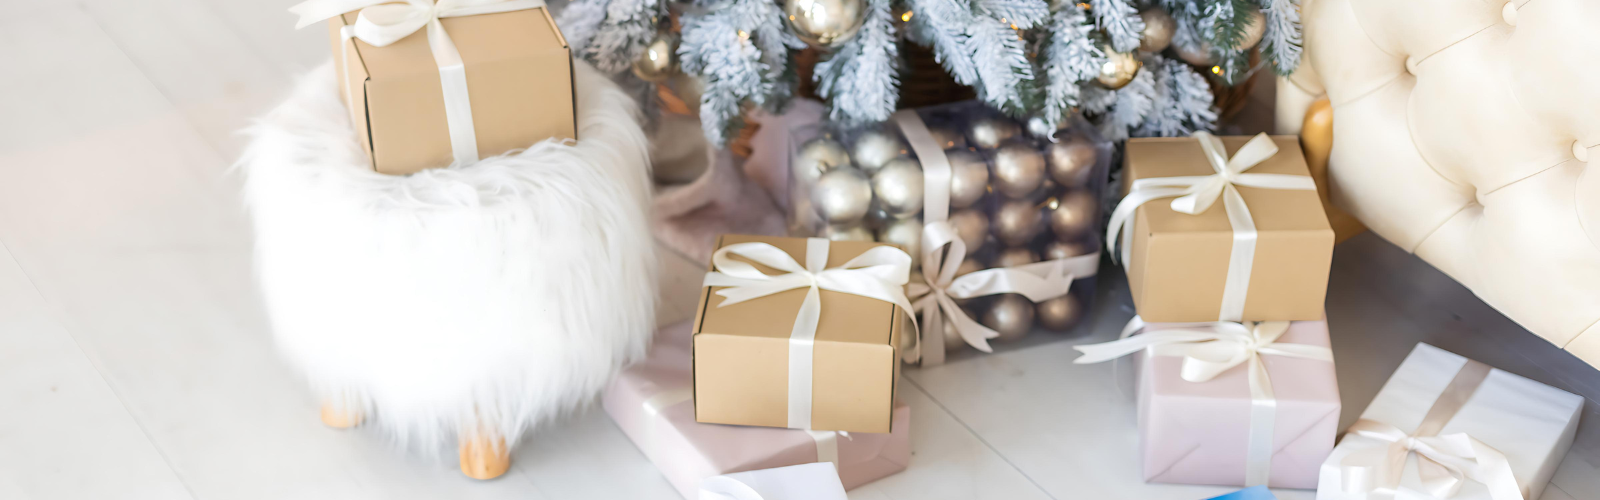 Get Inspired to Prepare for the Holidays | Uncluttered